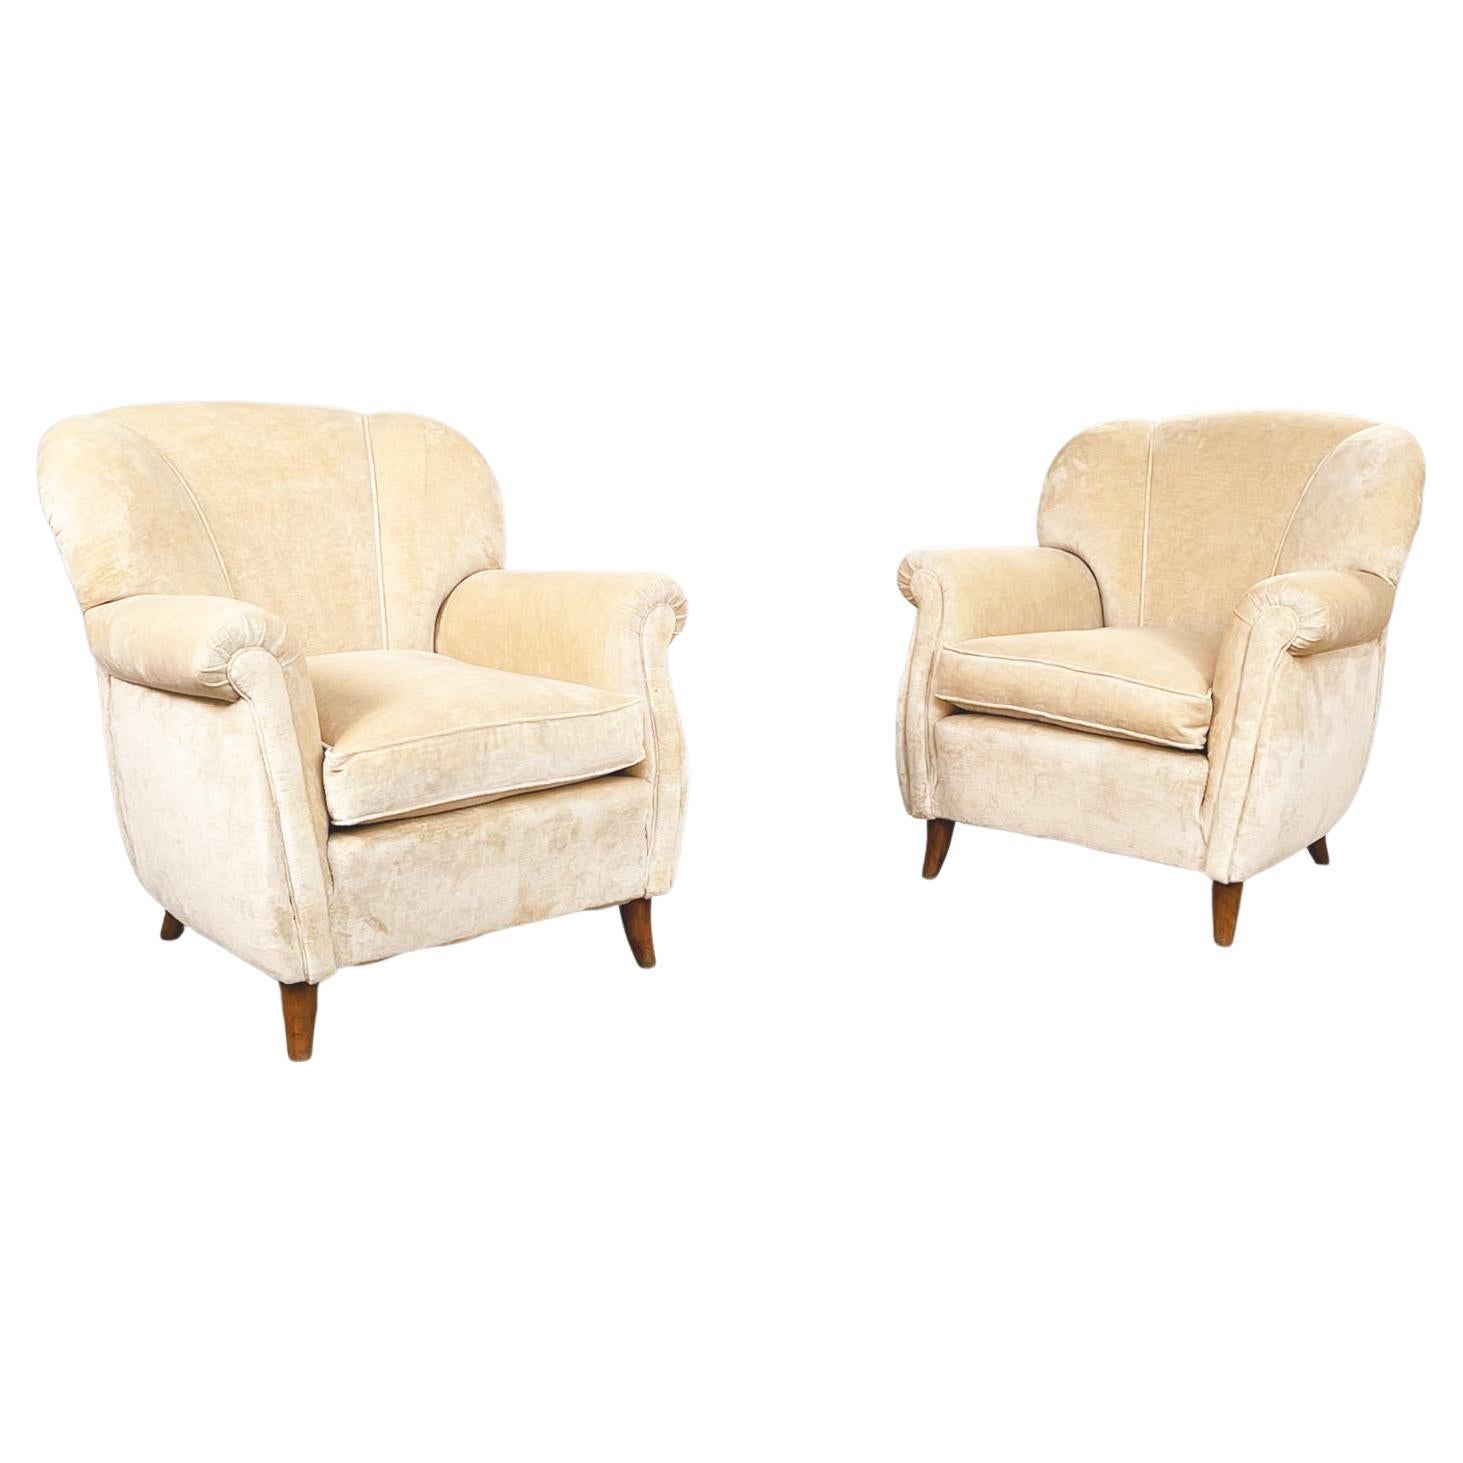 Italian Mid-Century Modern Wooden Armchairs in Beige Fabric, 1960s For Sale